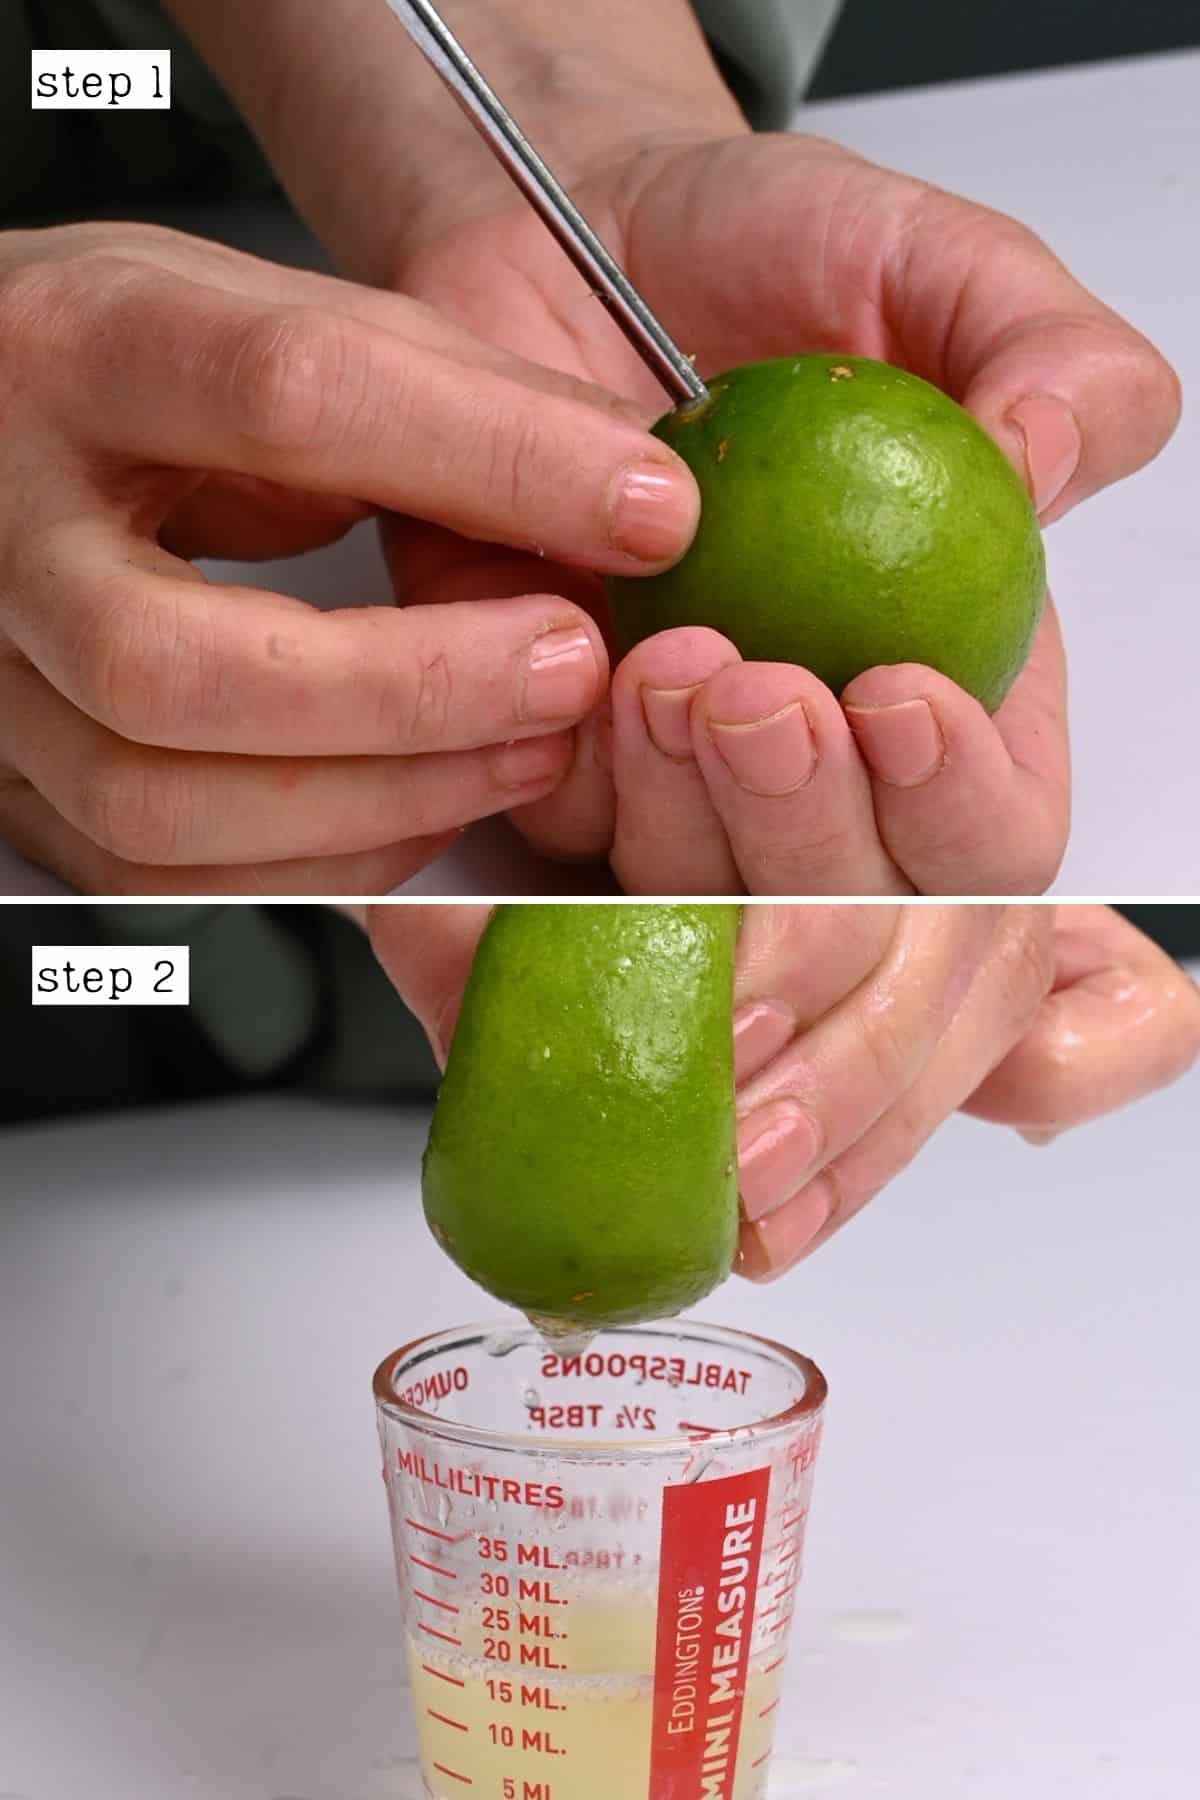 Steps for juicing lime by squeezing it